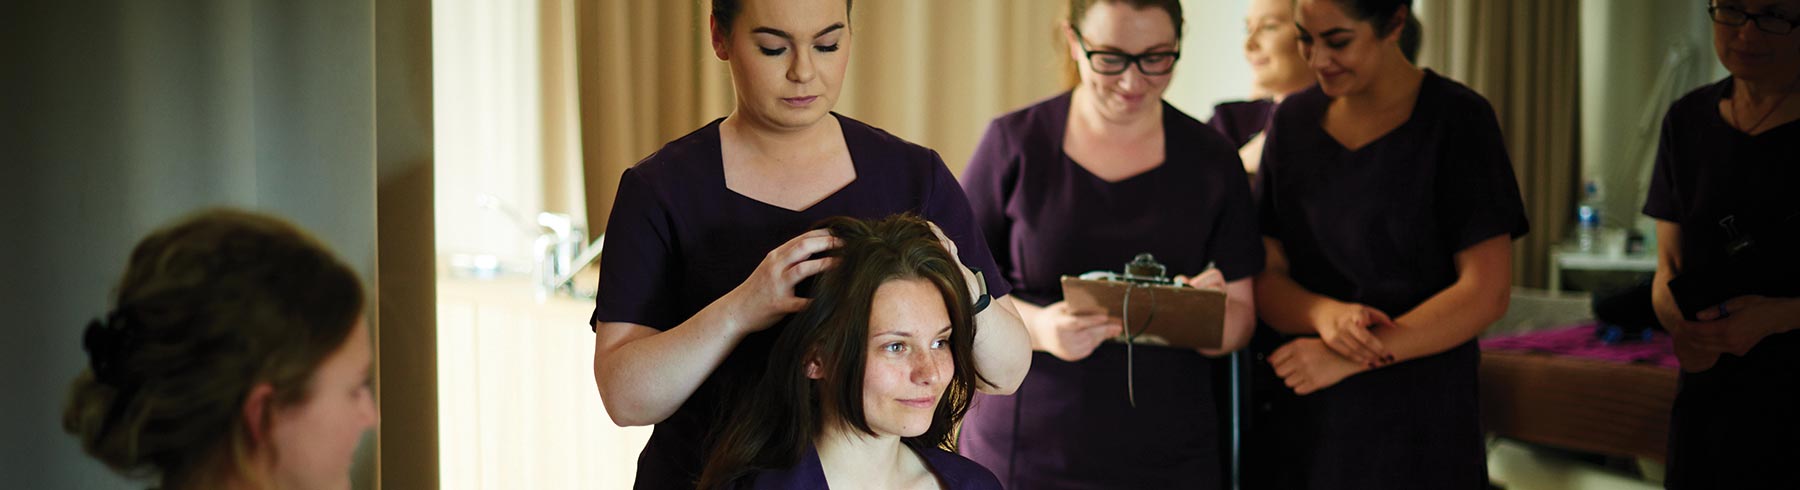 Hair, Beauty & Therapies | Shrewsbury Colleges Group